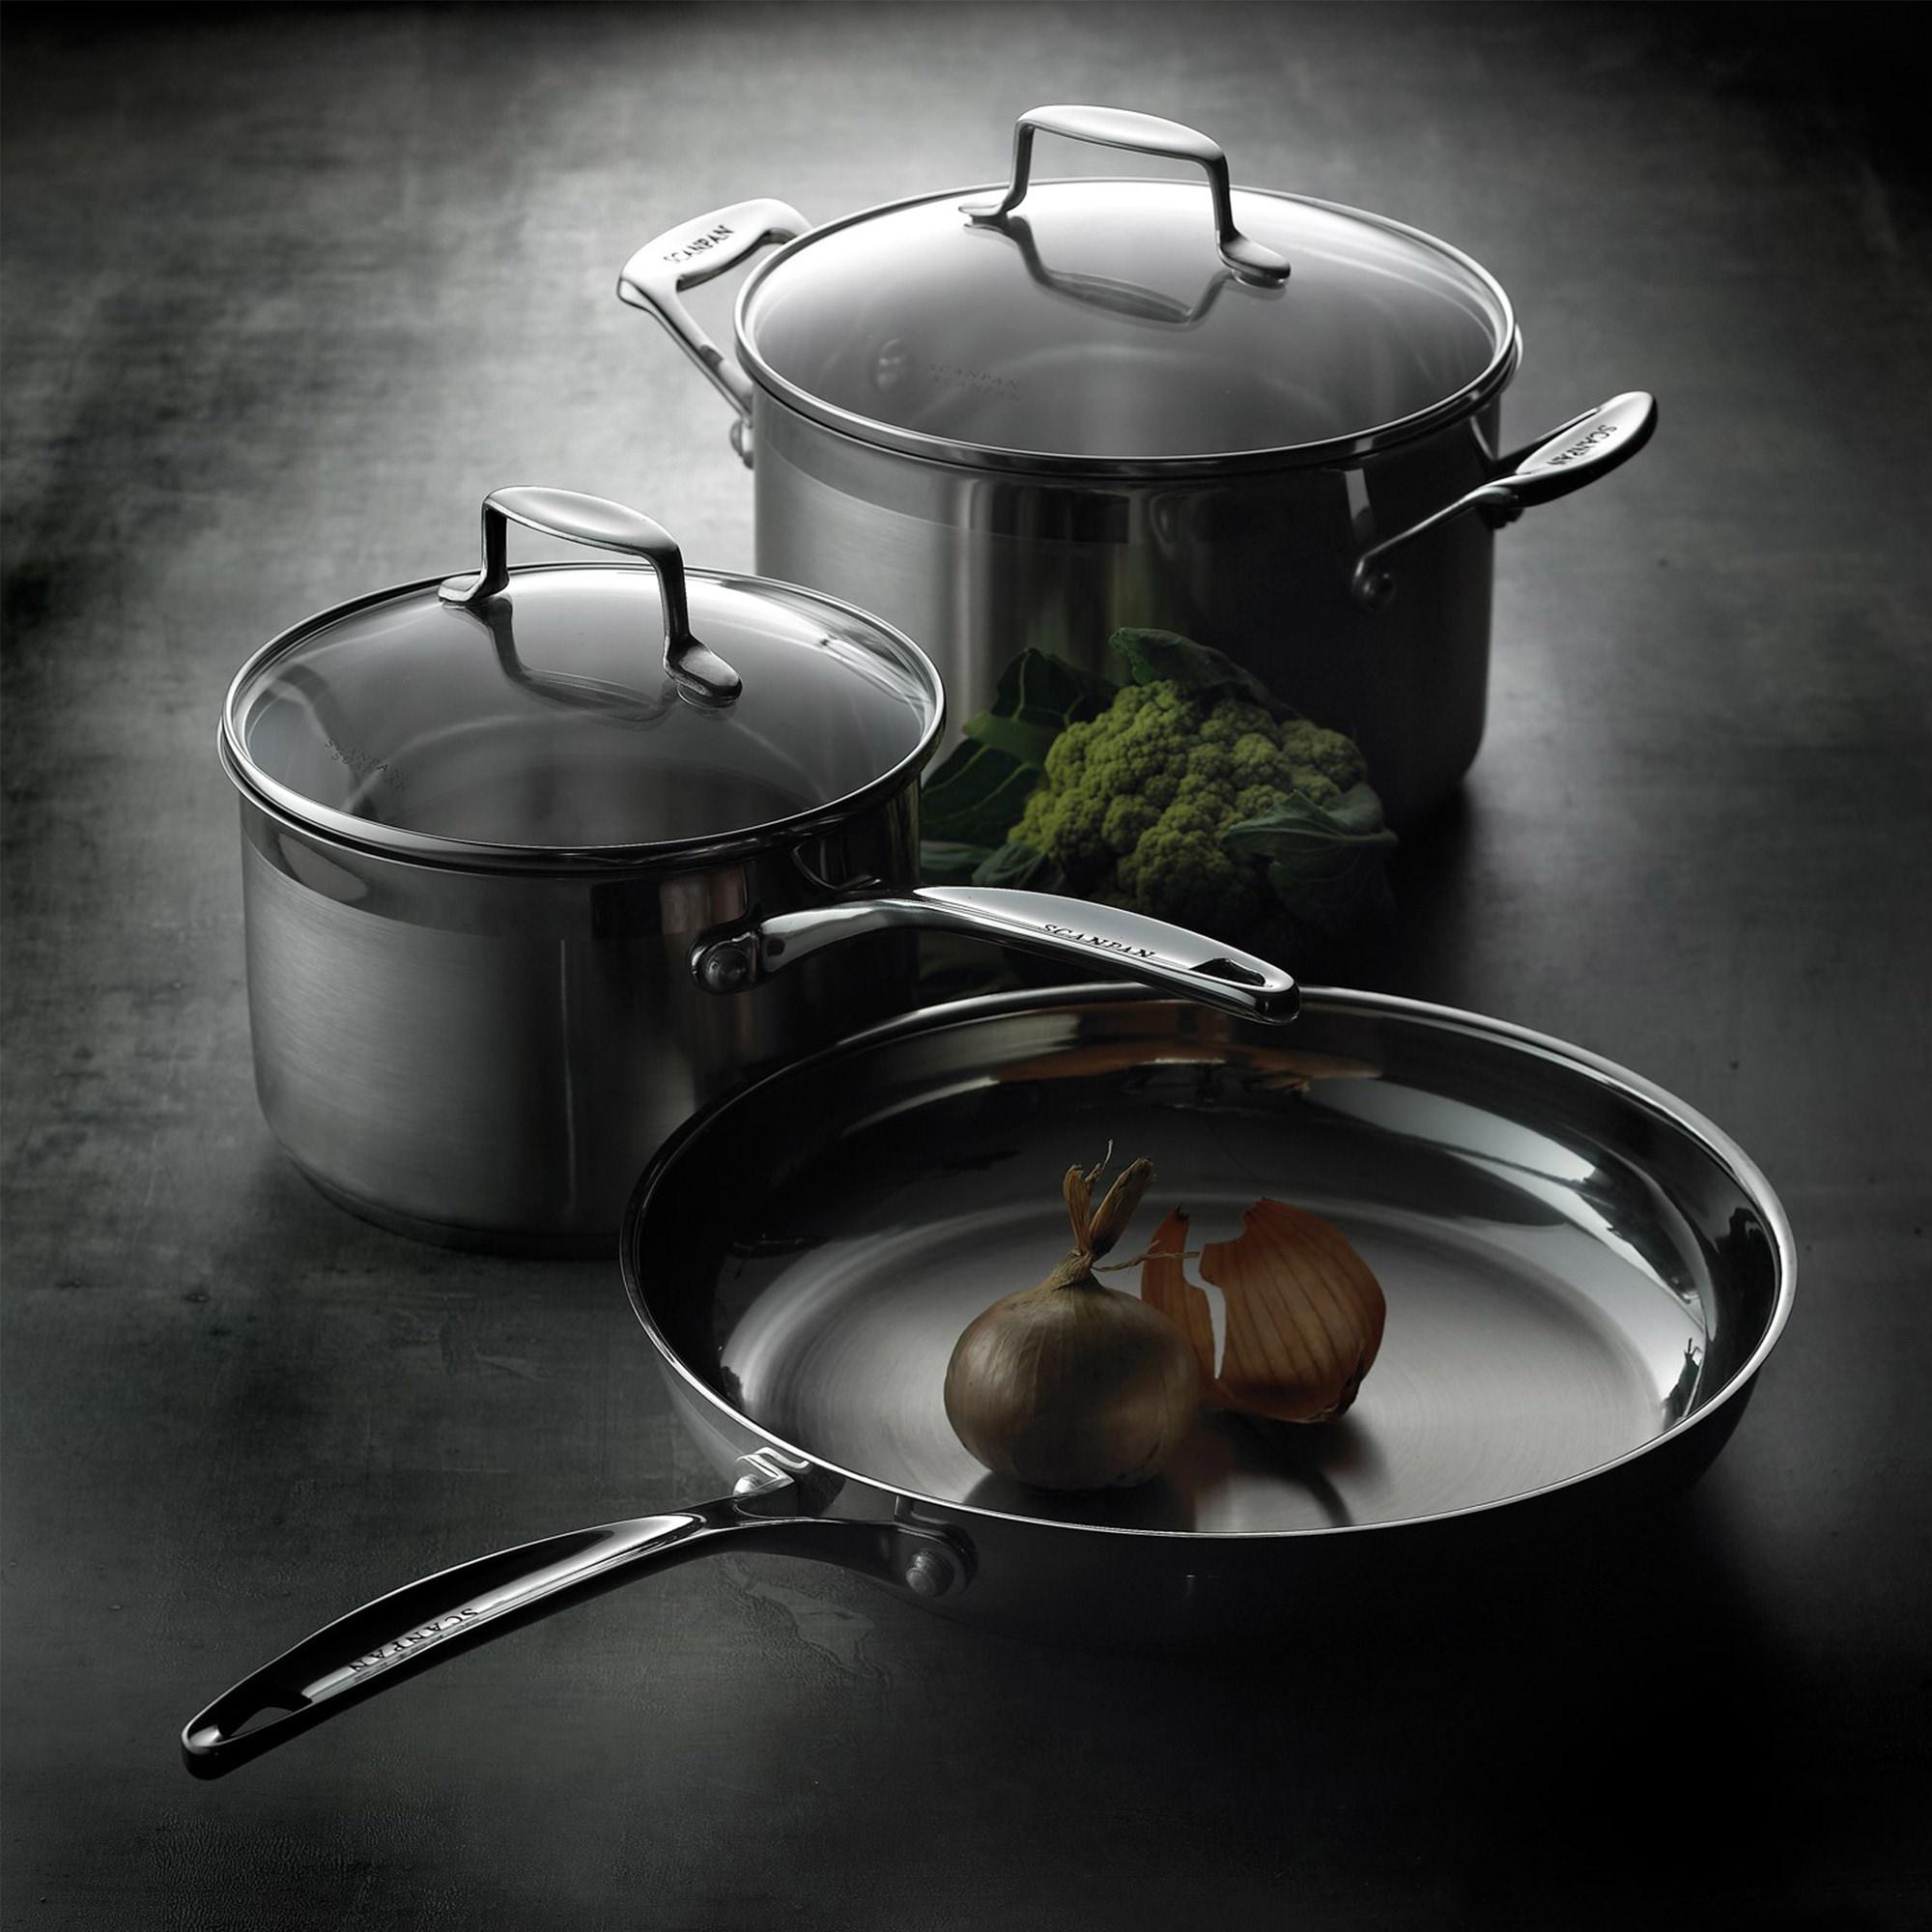 Scanpan Impact Stainless Steel Saucepan with Lid 20cm - 3.5L Image 4